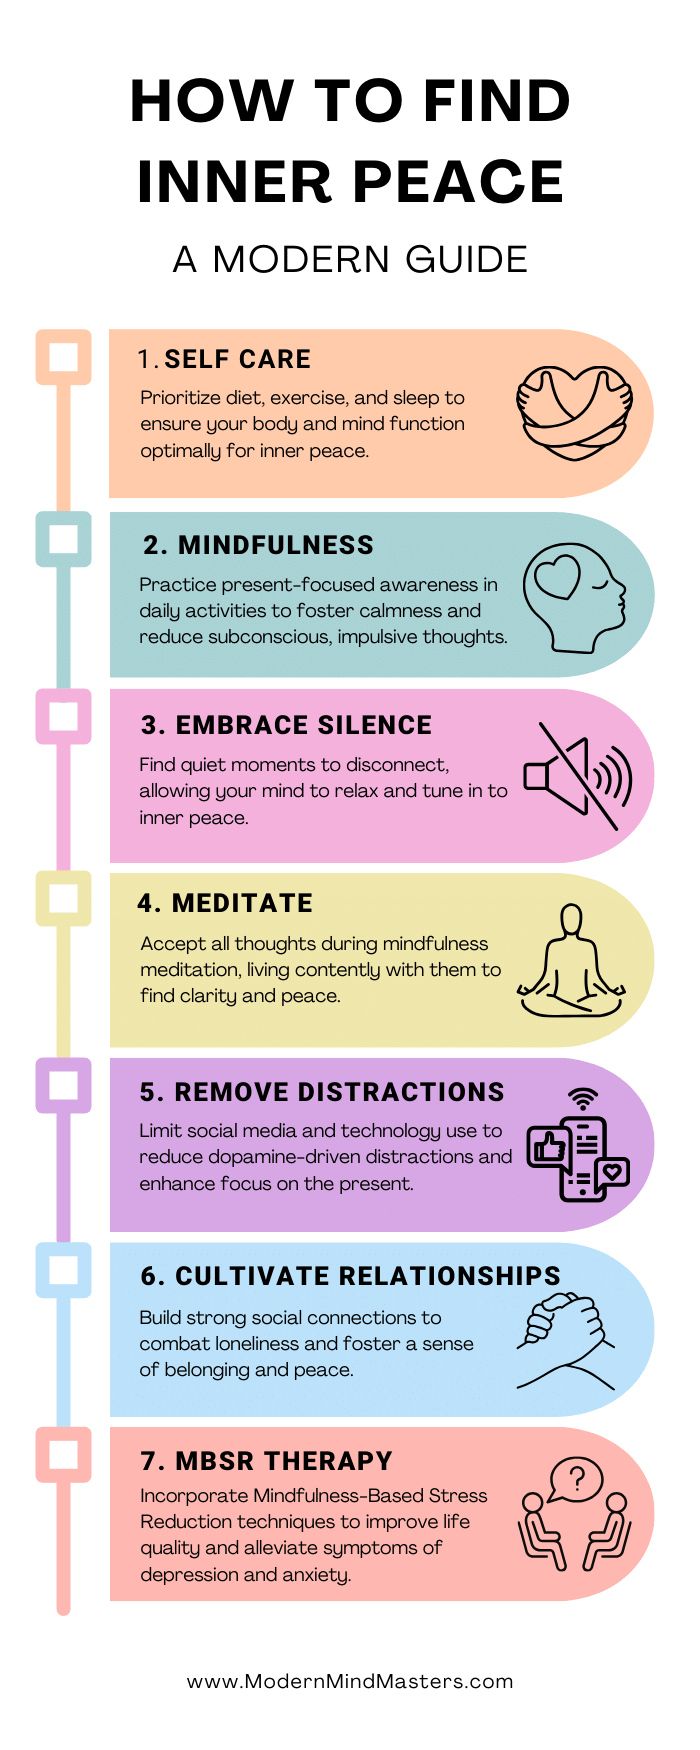 How to find inner peace - a 7 step guide